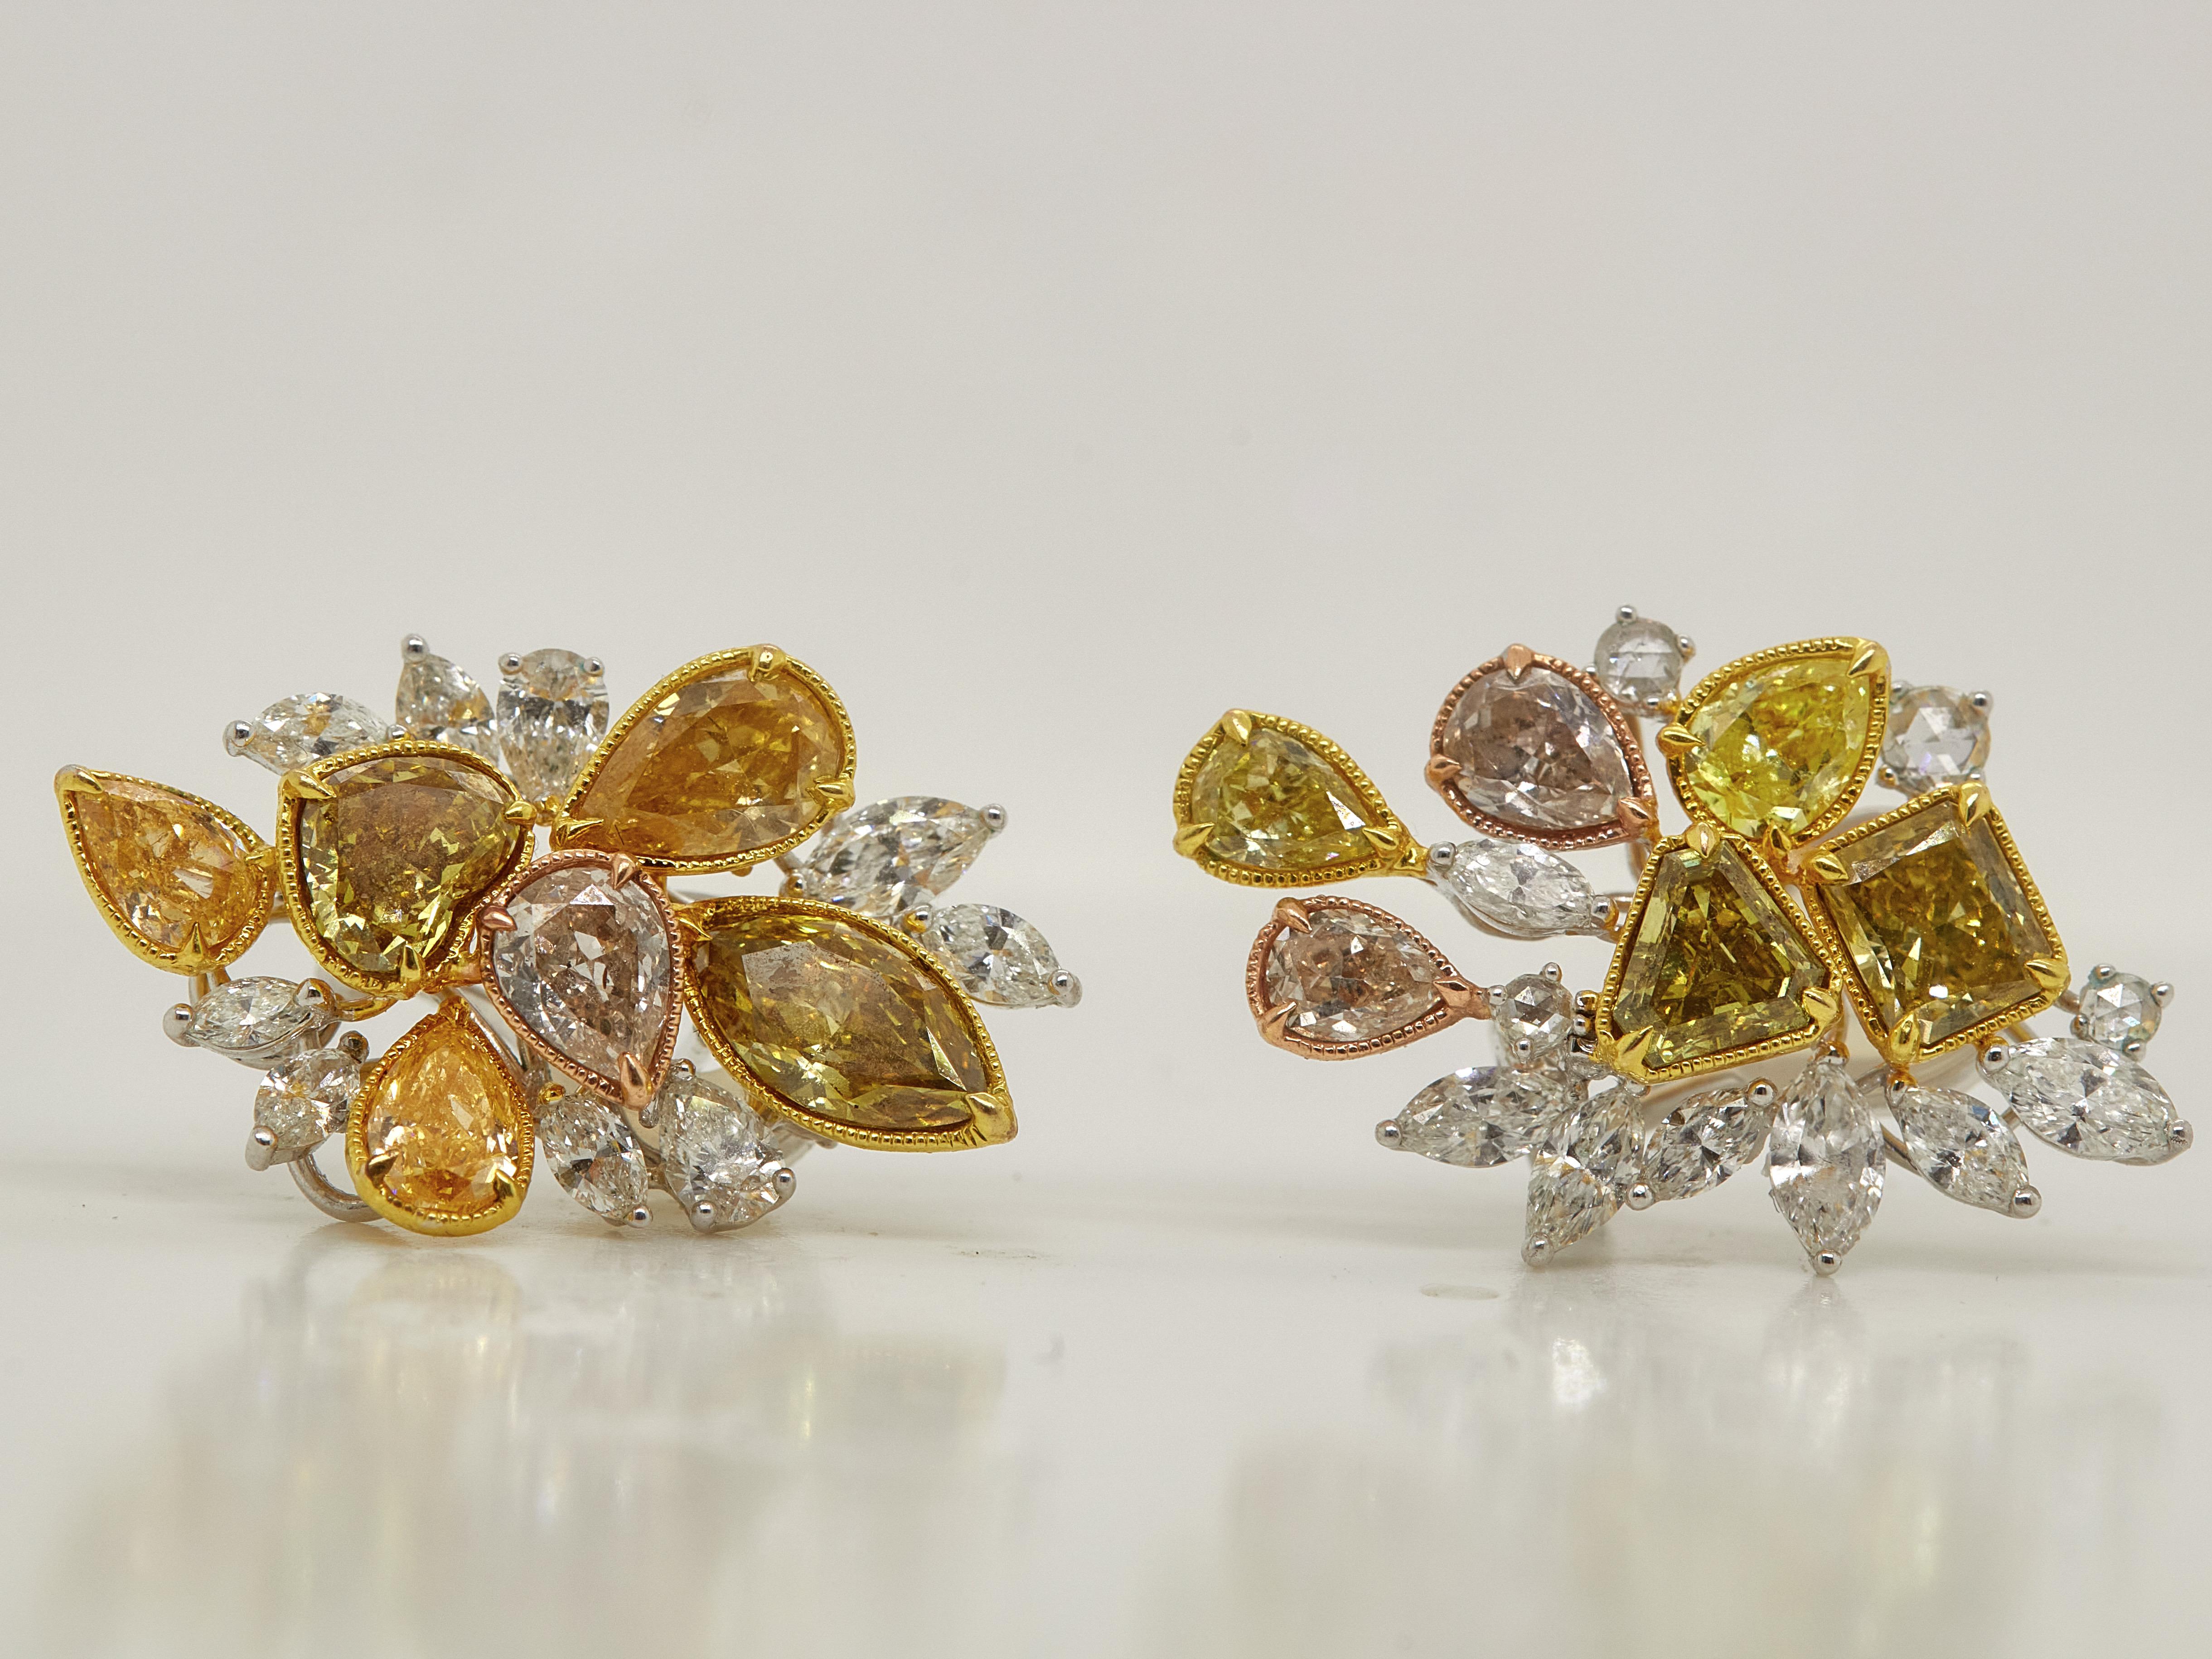 From the Novel Collection. A magnificent 8.20 carat multicolor, Cluster studs Diamonds earrings  with colorful accents, these Yellow, Pink, Brown and White Diamond earrings offer a vibrant take on a classic jewel.
8 mixed color pear-shaped diamonds